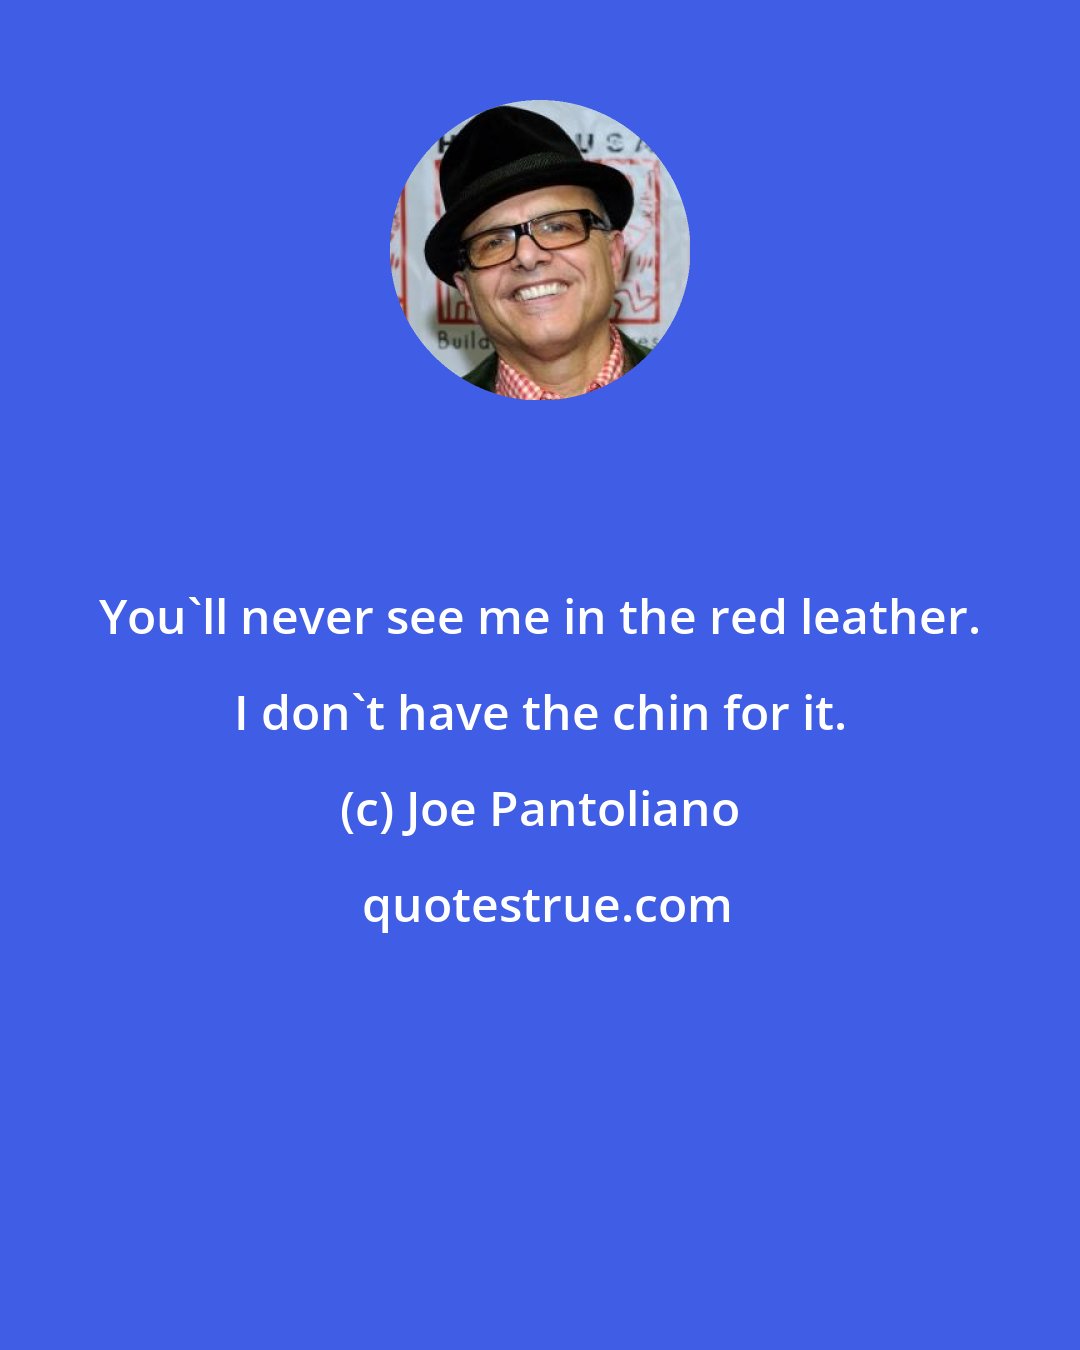 Joe Pantoliano: You'll never see me in the red leather. I don't have the chin for it.